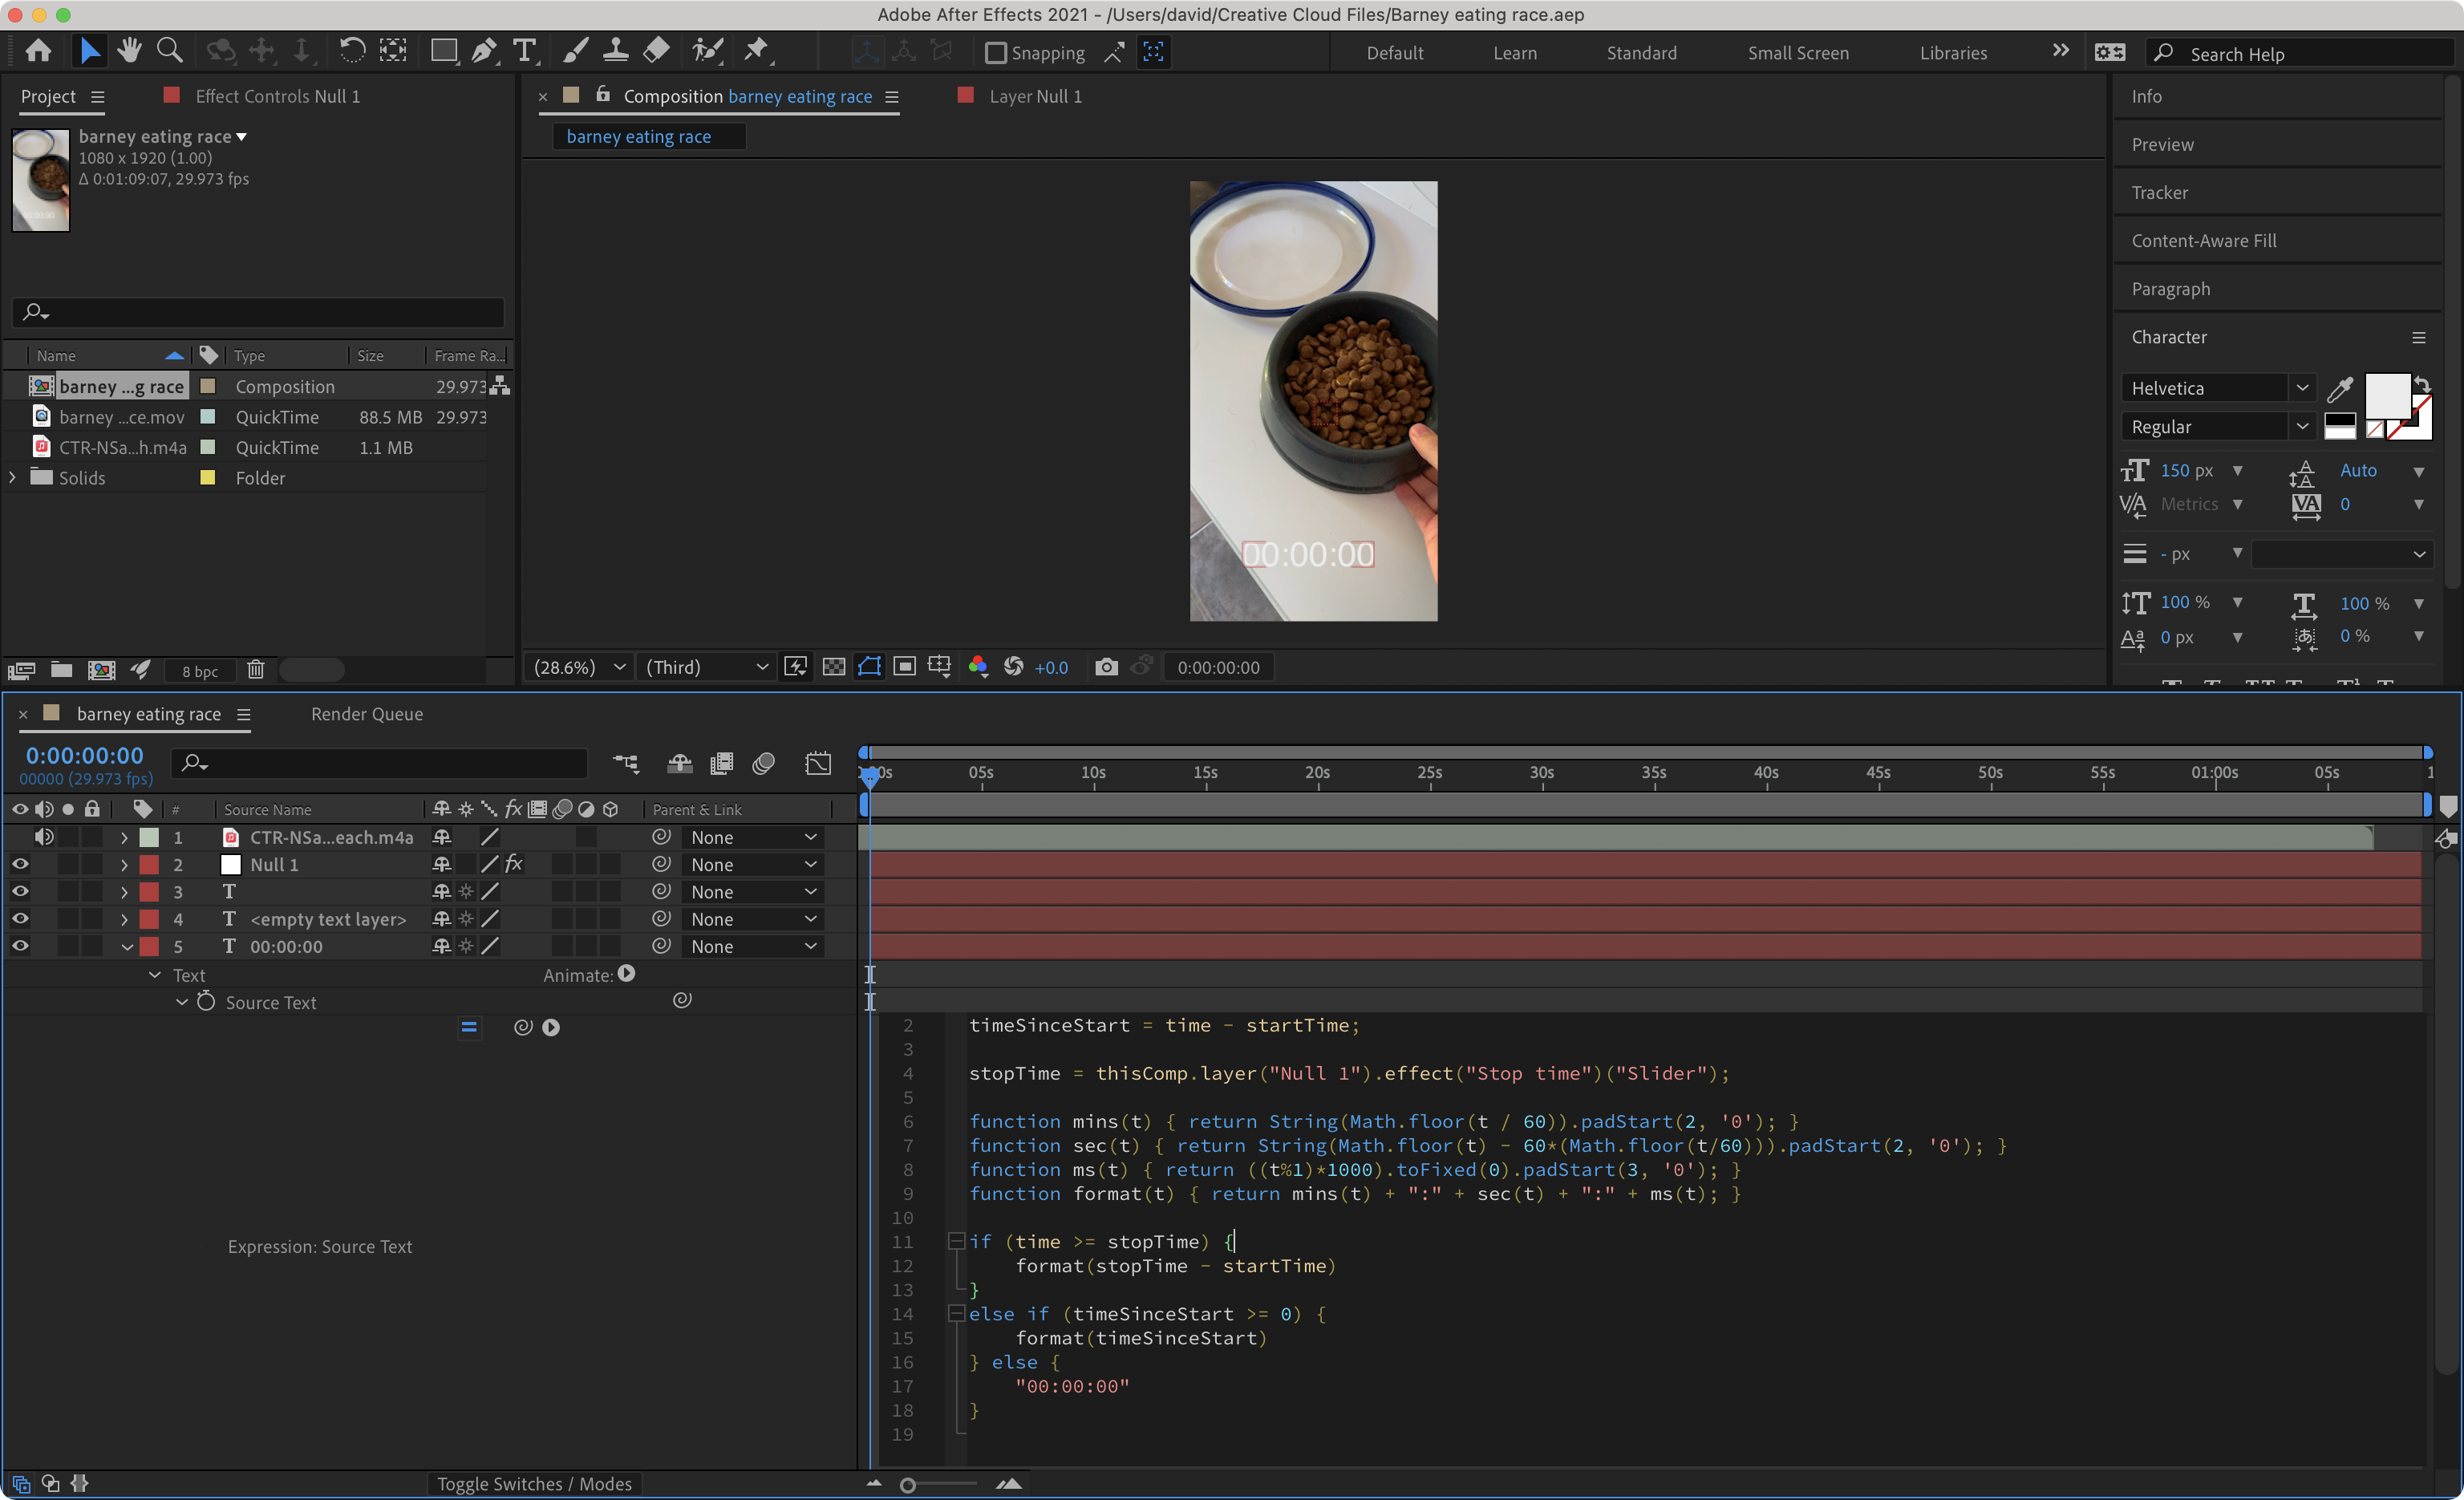 Screenshot of the Adobe After Effects workspace used for this project.